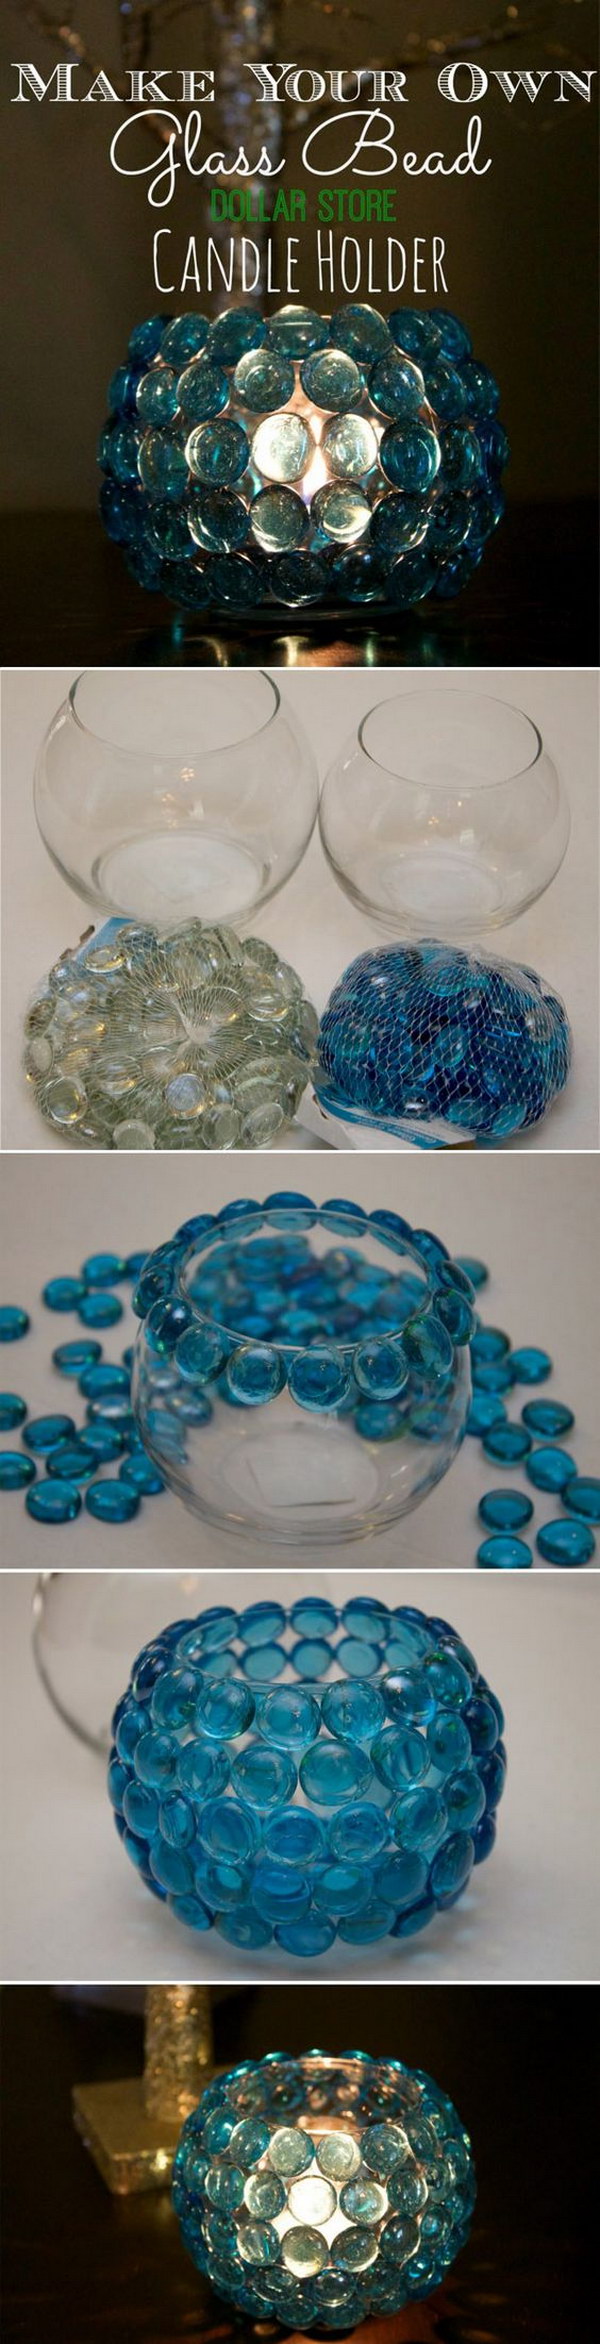 DIY Candle Holder Wedding Centerpieces With Glass Bead. 